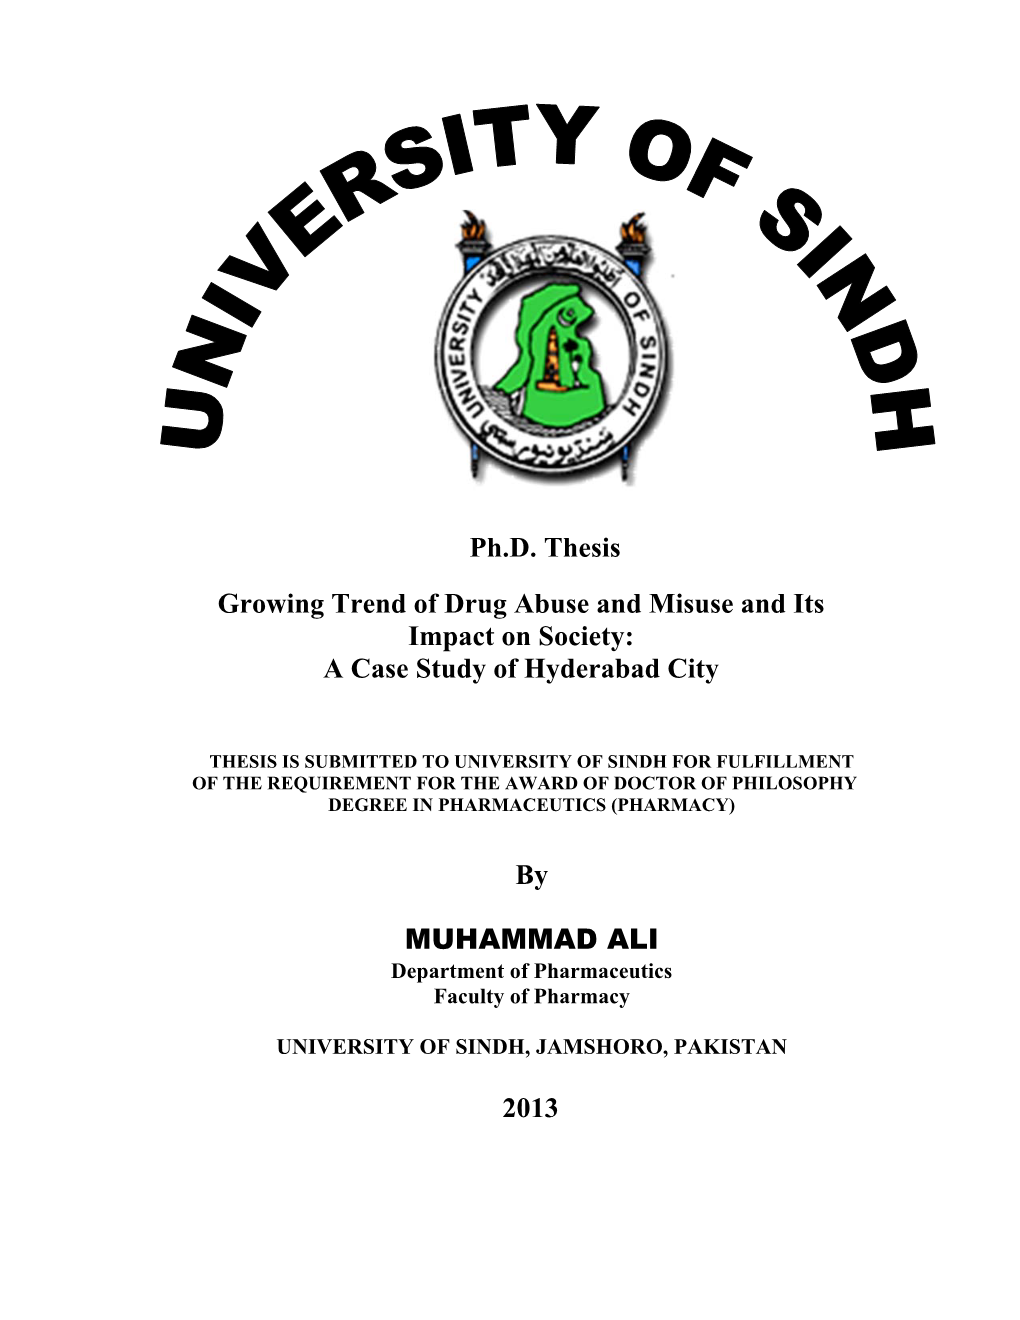 Ph.D. Thesis Growing Trend of Drug Abuse and Misuse and Its Impact on Society: a Case Study of Hyderabad City